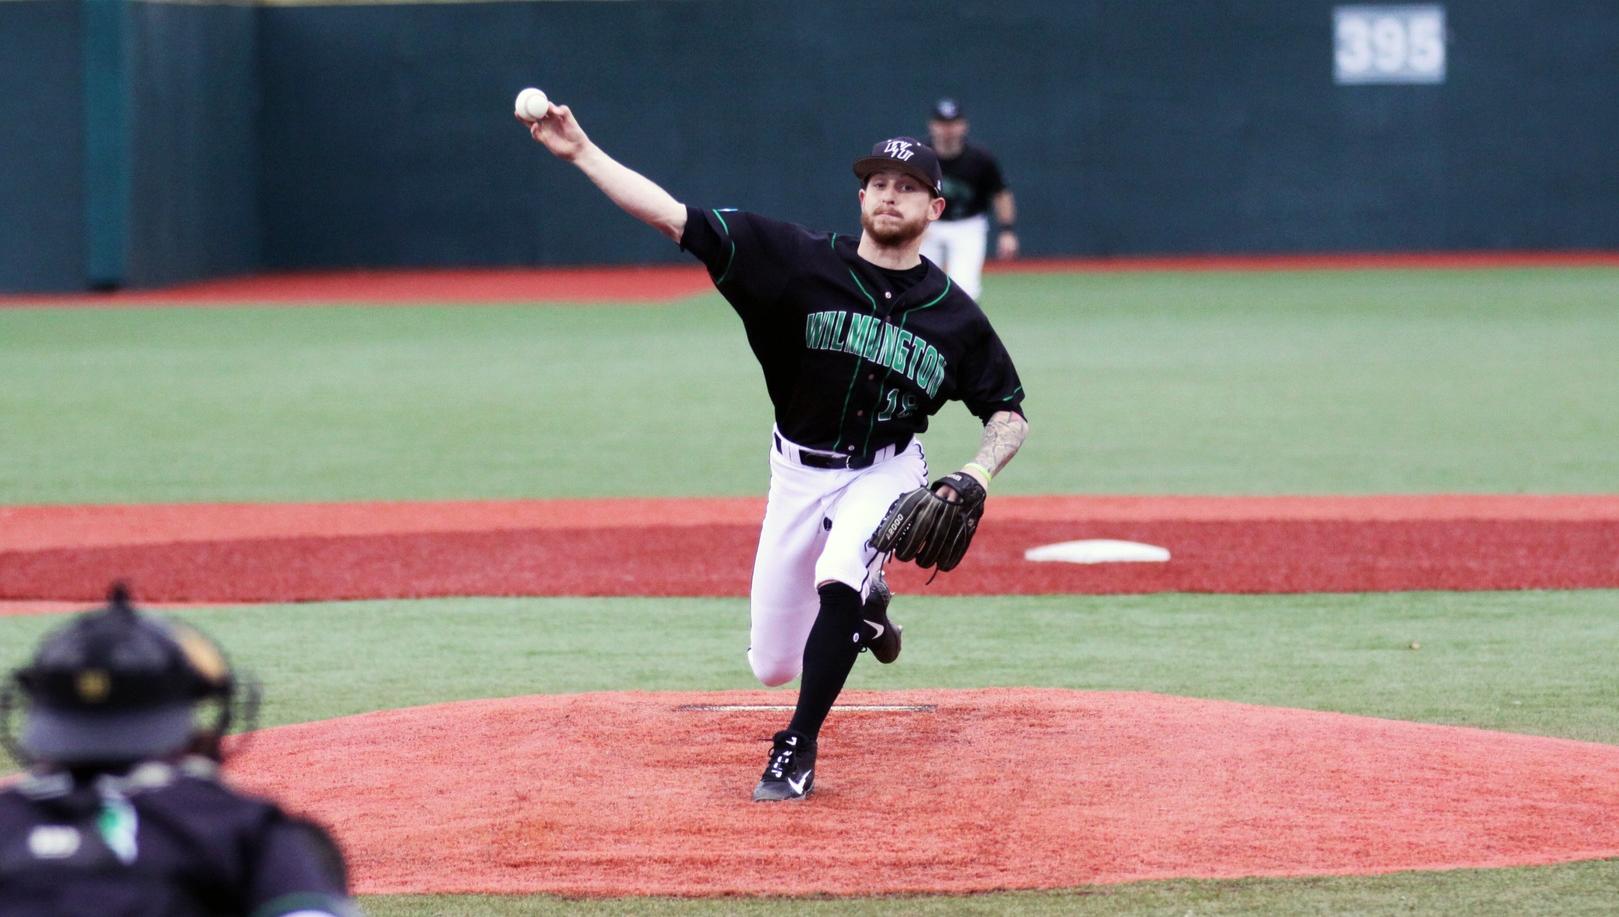 Copyright 2019; Wilmington University. All rights reserved. File photo of WilmU starter Noah Latshaw. Photo by Dan Lauletta. February 22, 2019 vs. New Haven at Myrtle Beach, S.C.